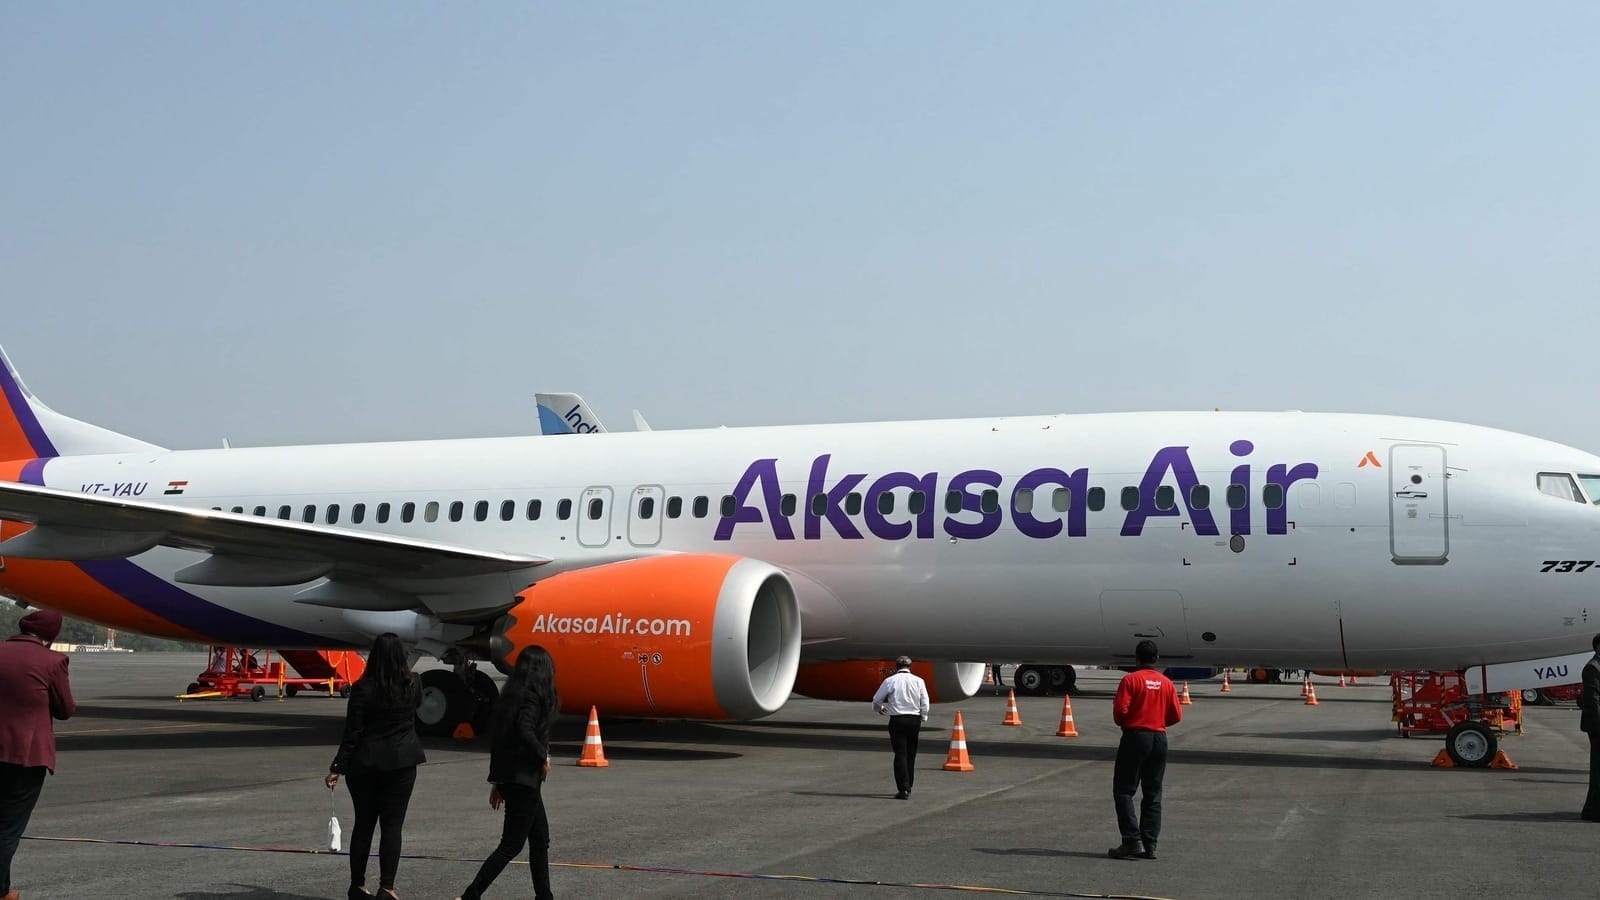 Man recalls 'horrible experience' with Akasa Airlines while flying with pet. Here's what happened